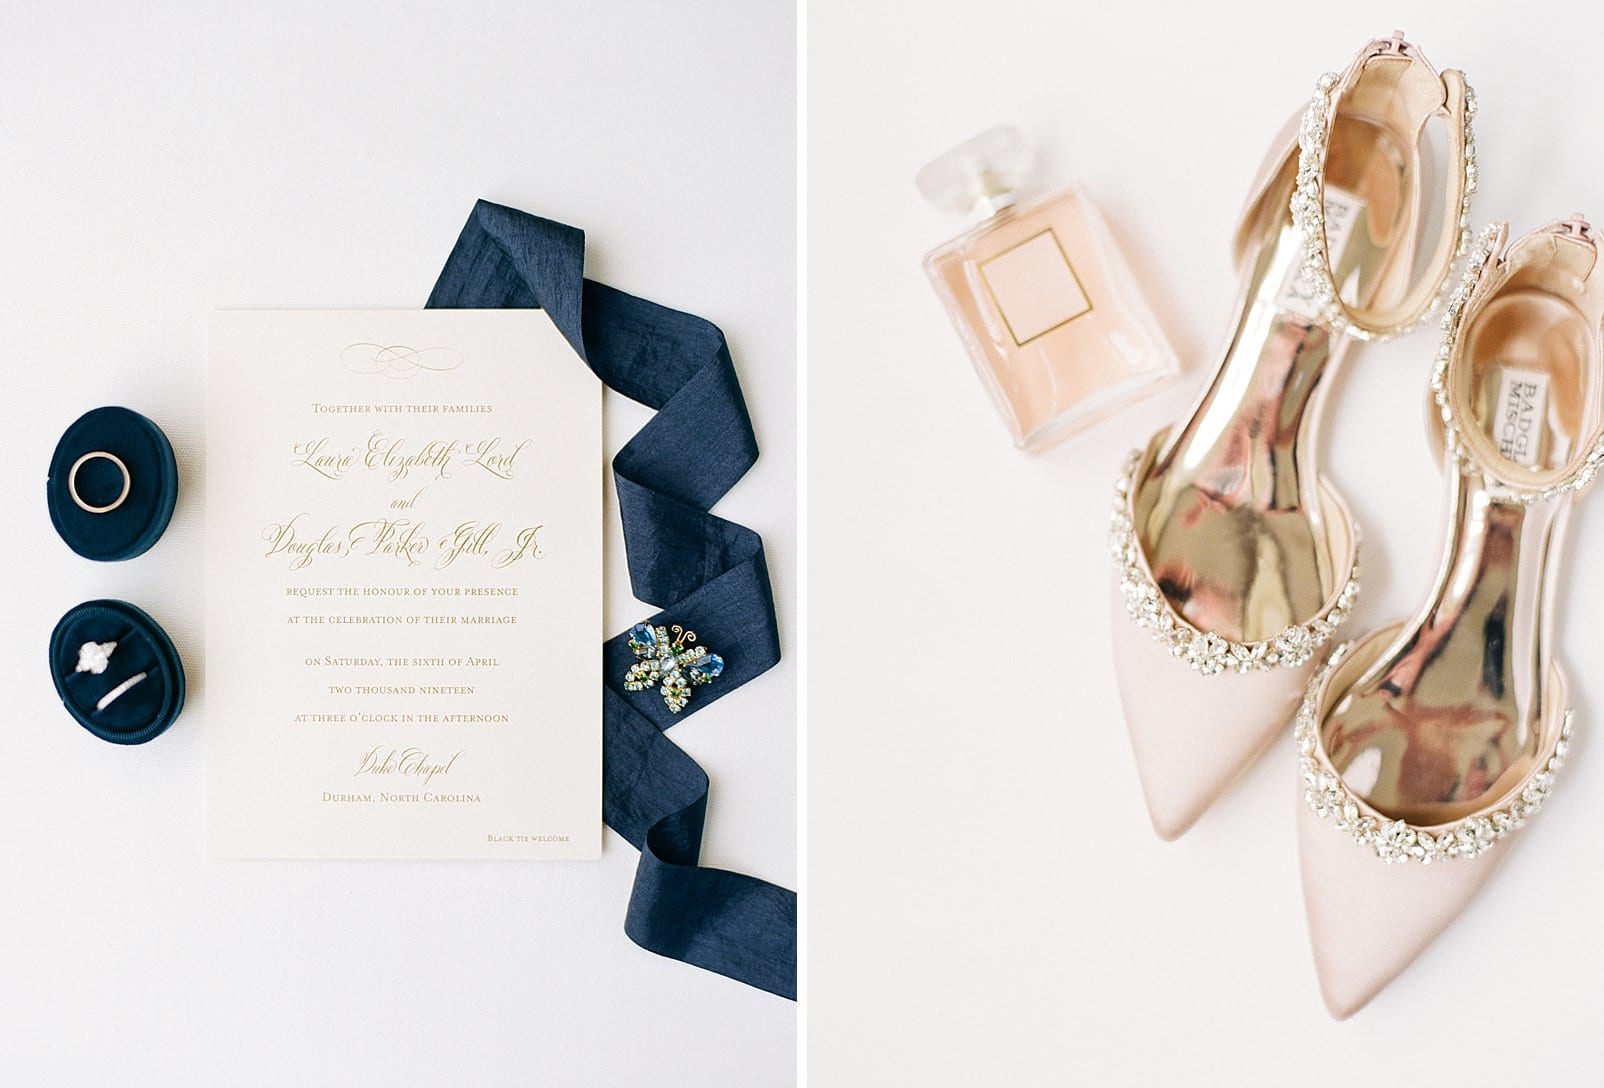 Reaves Engraving wedding invitation suite with navy blue ribbon and Badgley Mischka wedding shoes photo